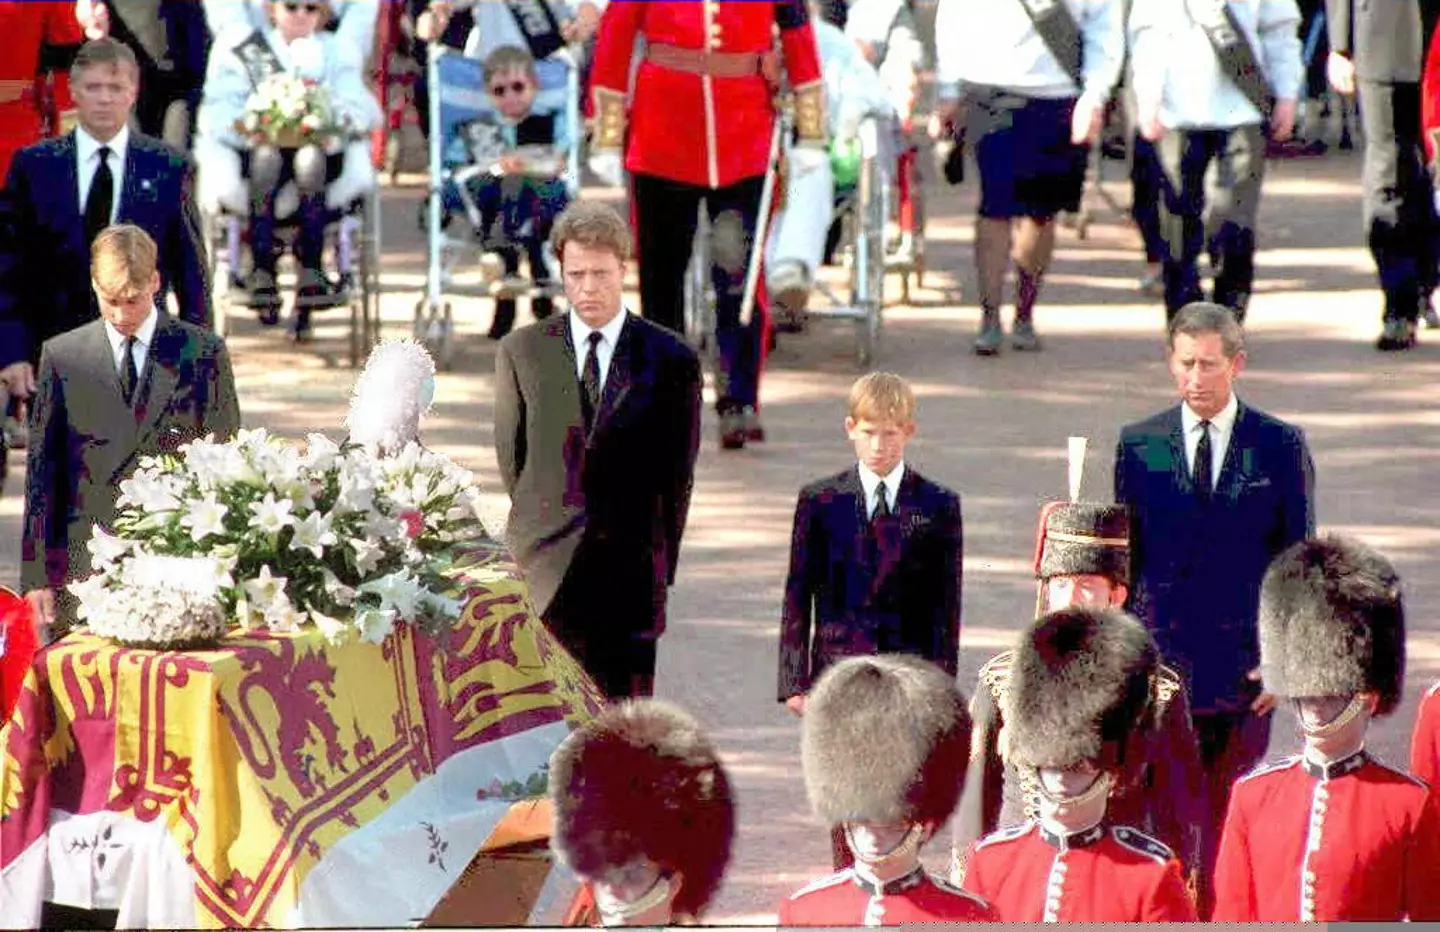 Princess Diana's funeral was a tragic day for the nation. (ADAM BUTLER/POOL/AFP via Getty Images)